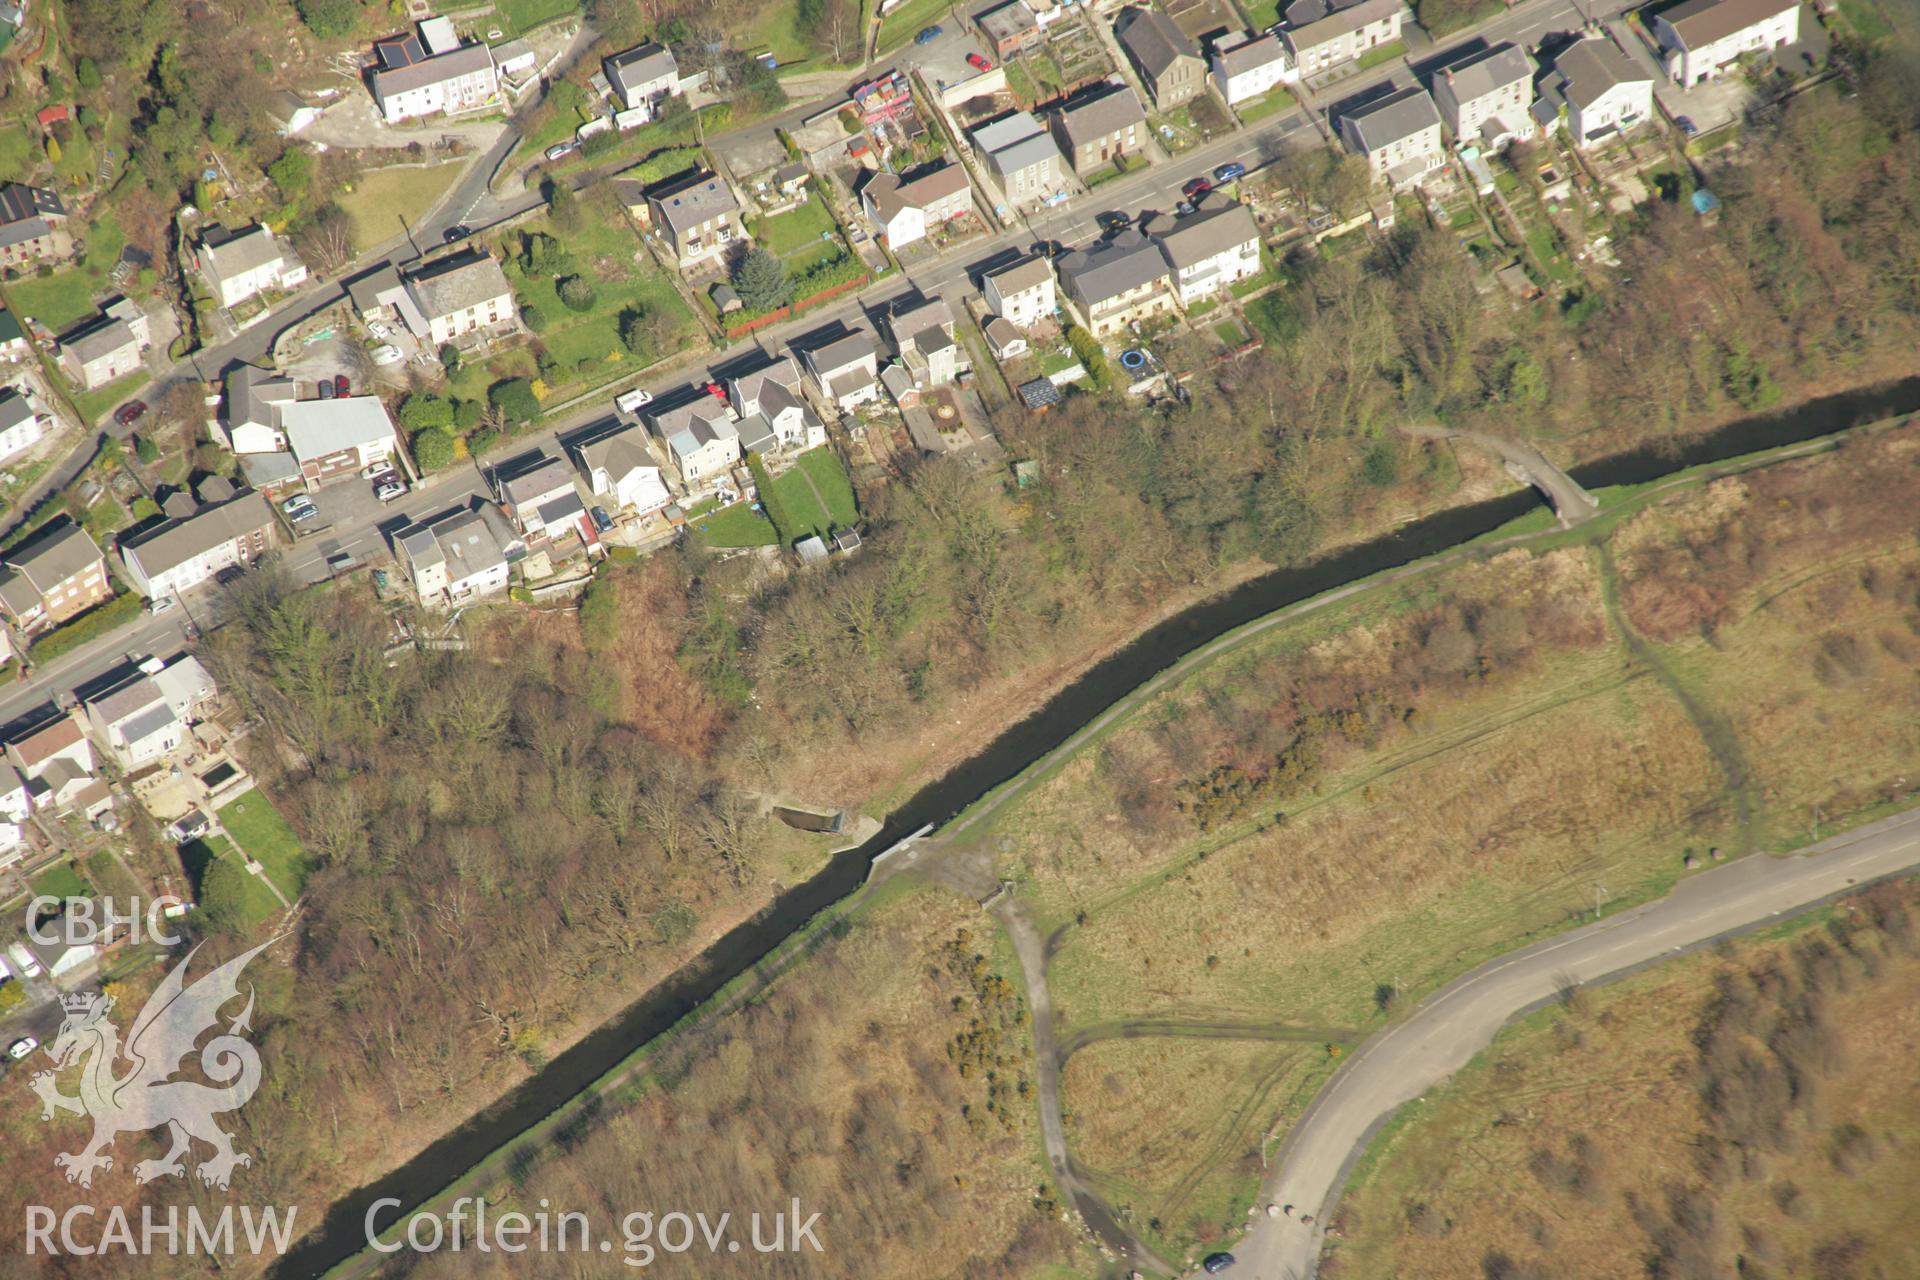 RCAHMW colour oblique aerial photograph of Ynys-Meudwy-Ganol Bridge, Swansea Canal, north-east of Pontardawe. Taken on 21 March 2007 by Toby Driver